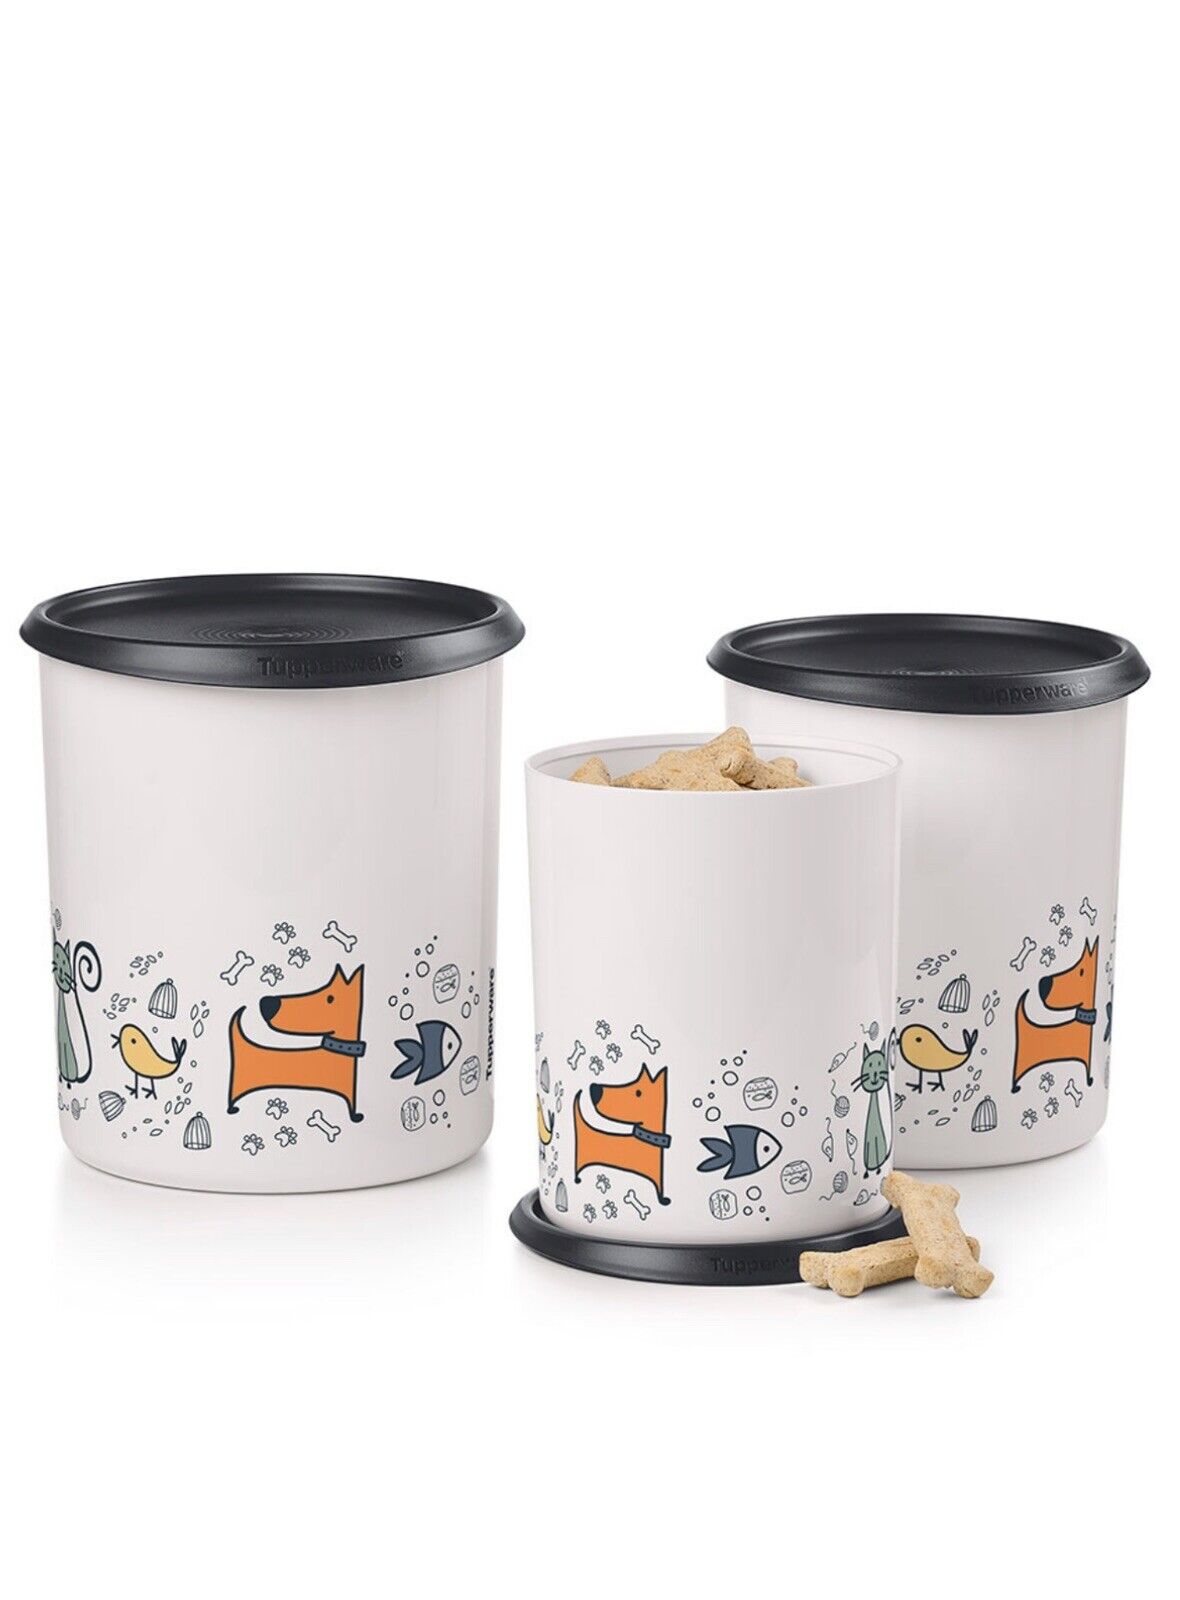 TUPPERWARE ONE TOUCH CANISTER SET 3 pc PAWSOME PETS DOG BONES FISH BIRD AIRTIGHT